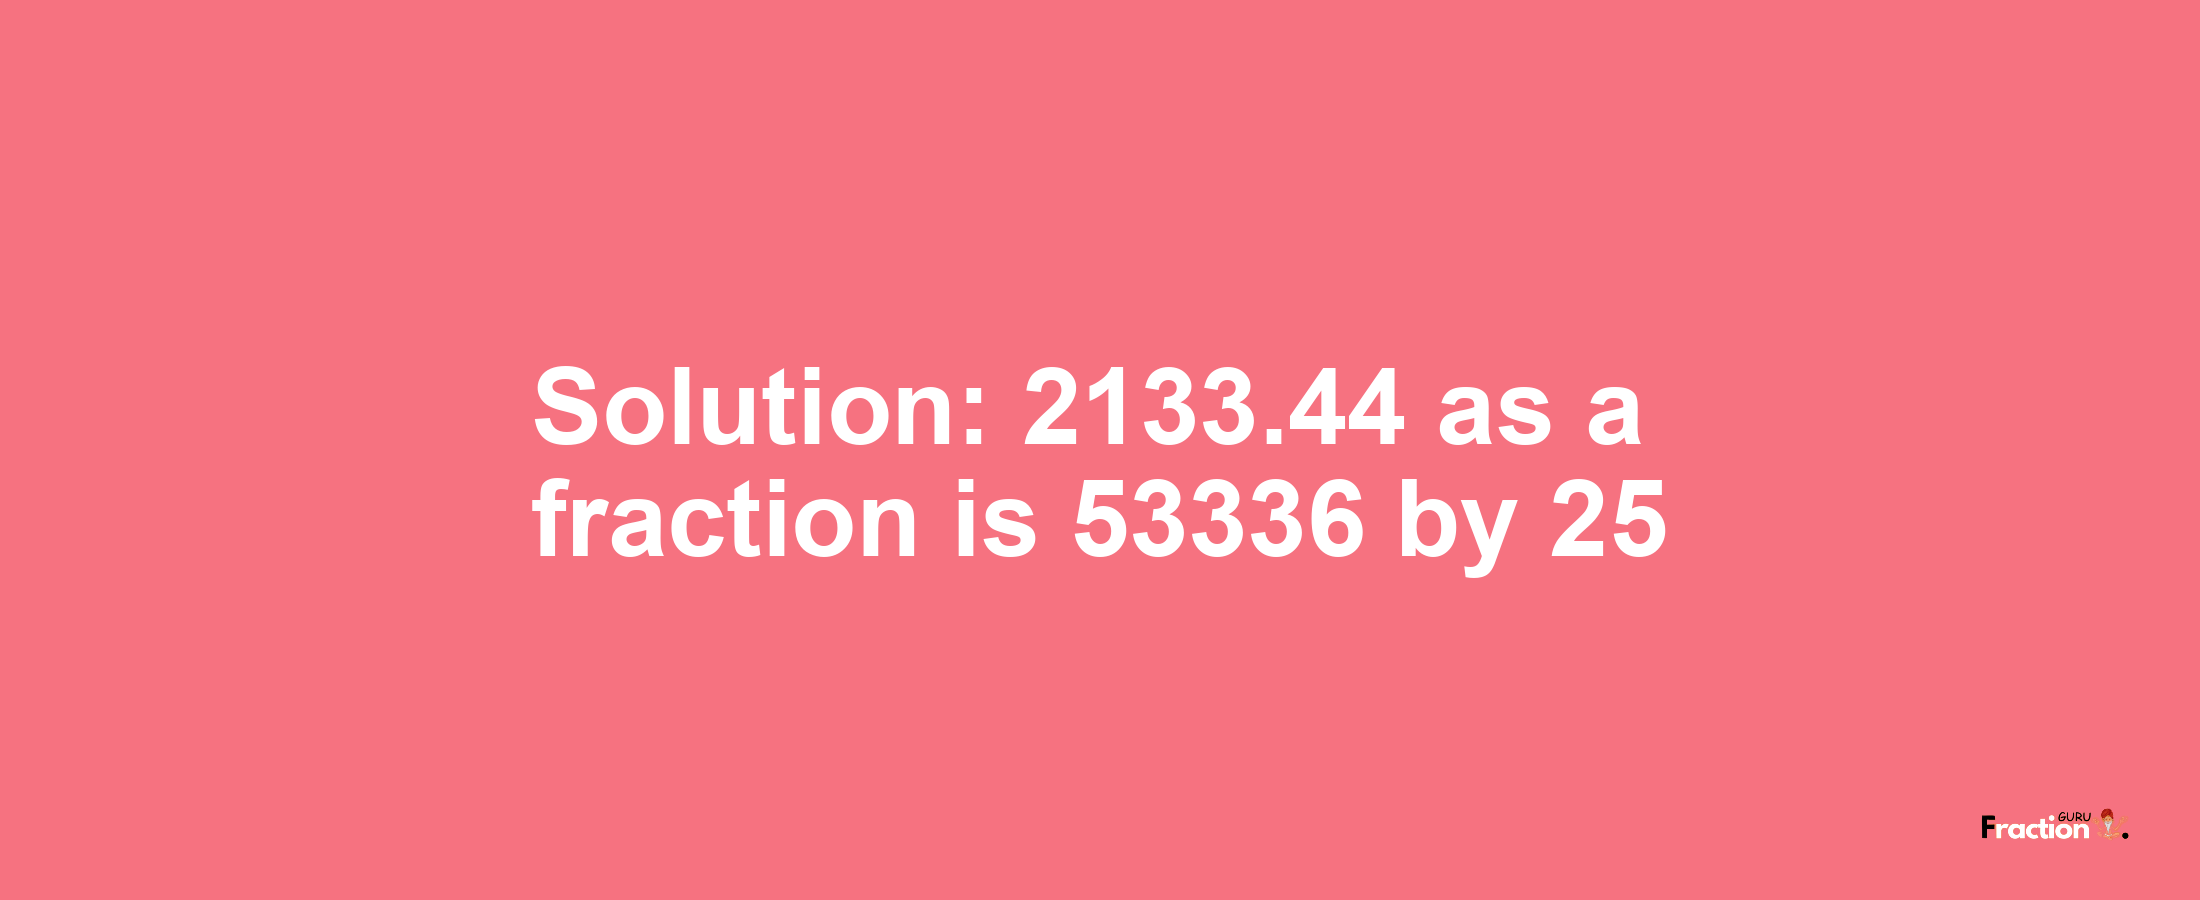 Solution:2133.44 as a fraction is 53336/25